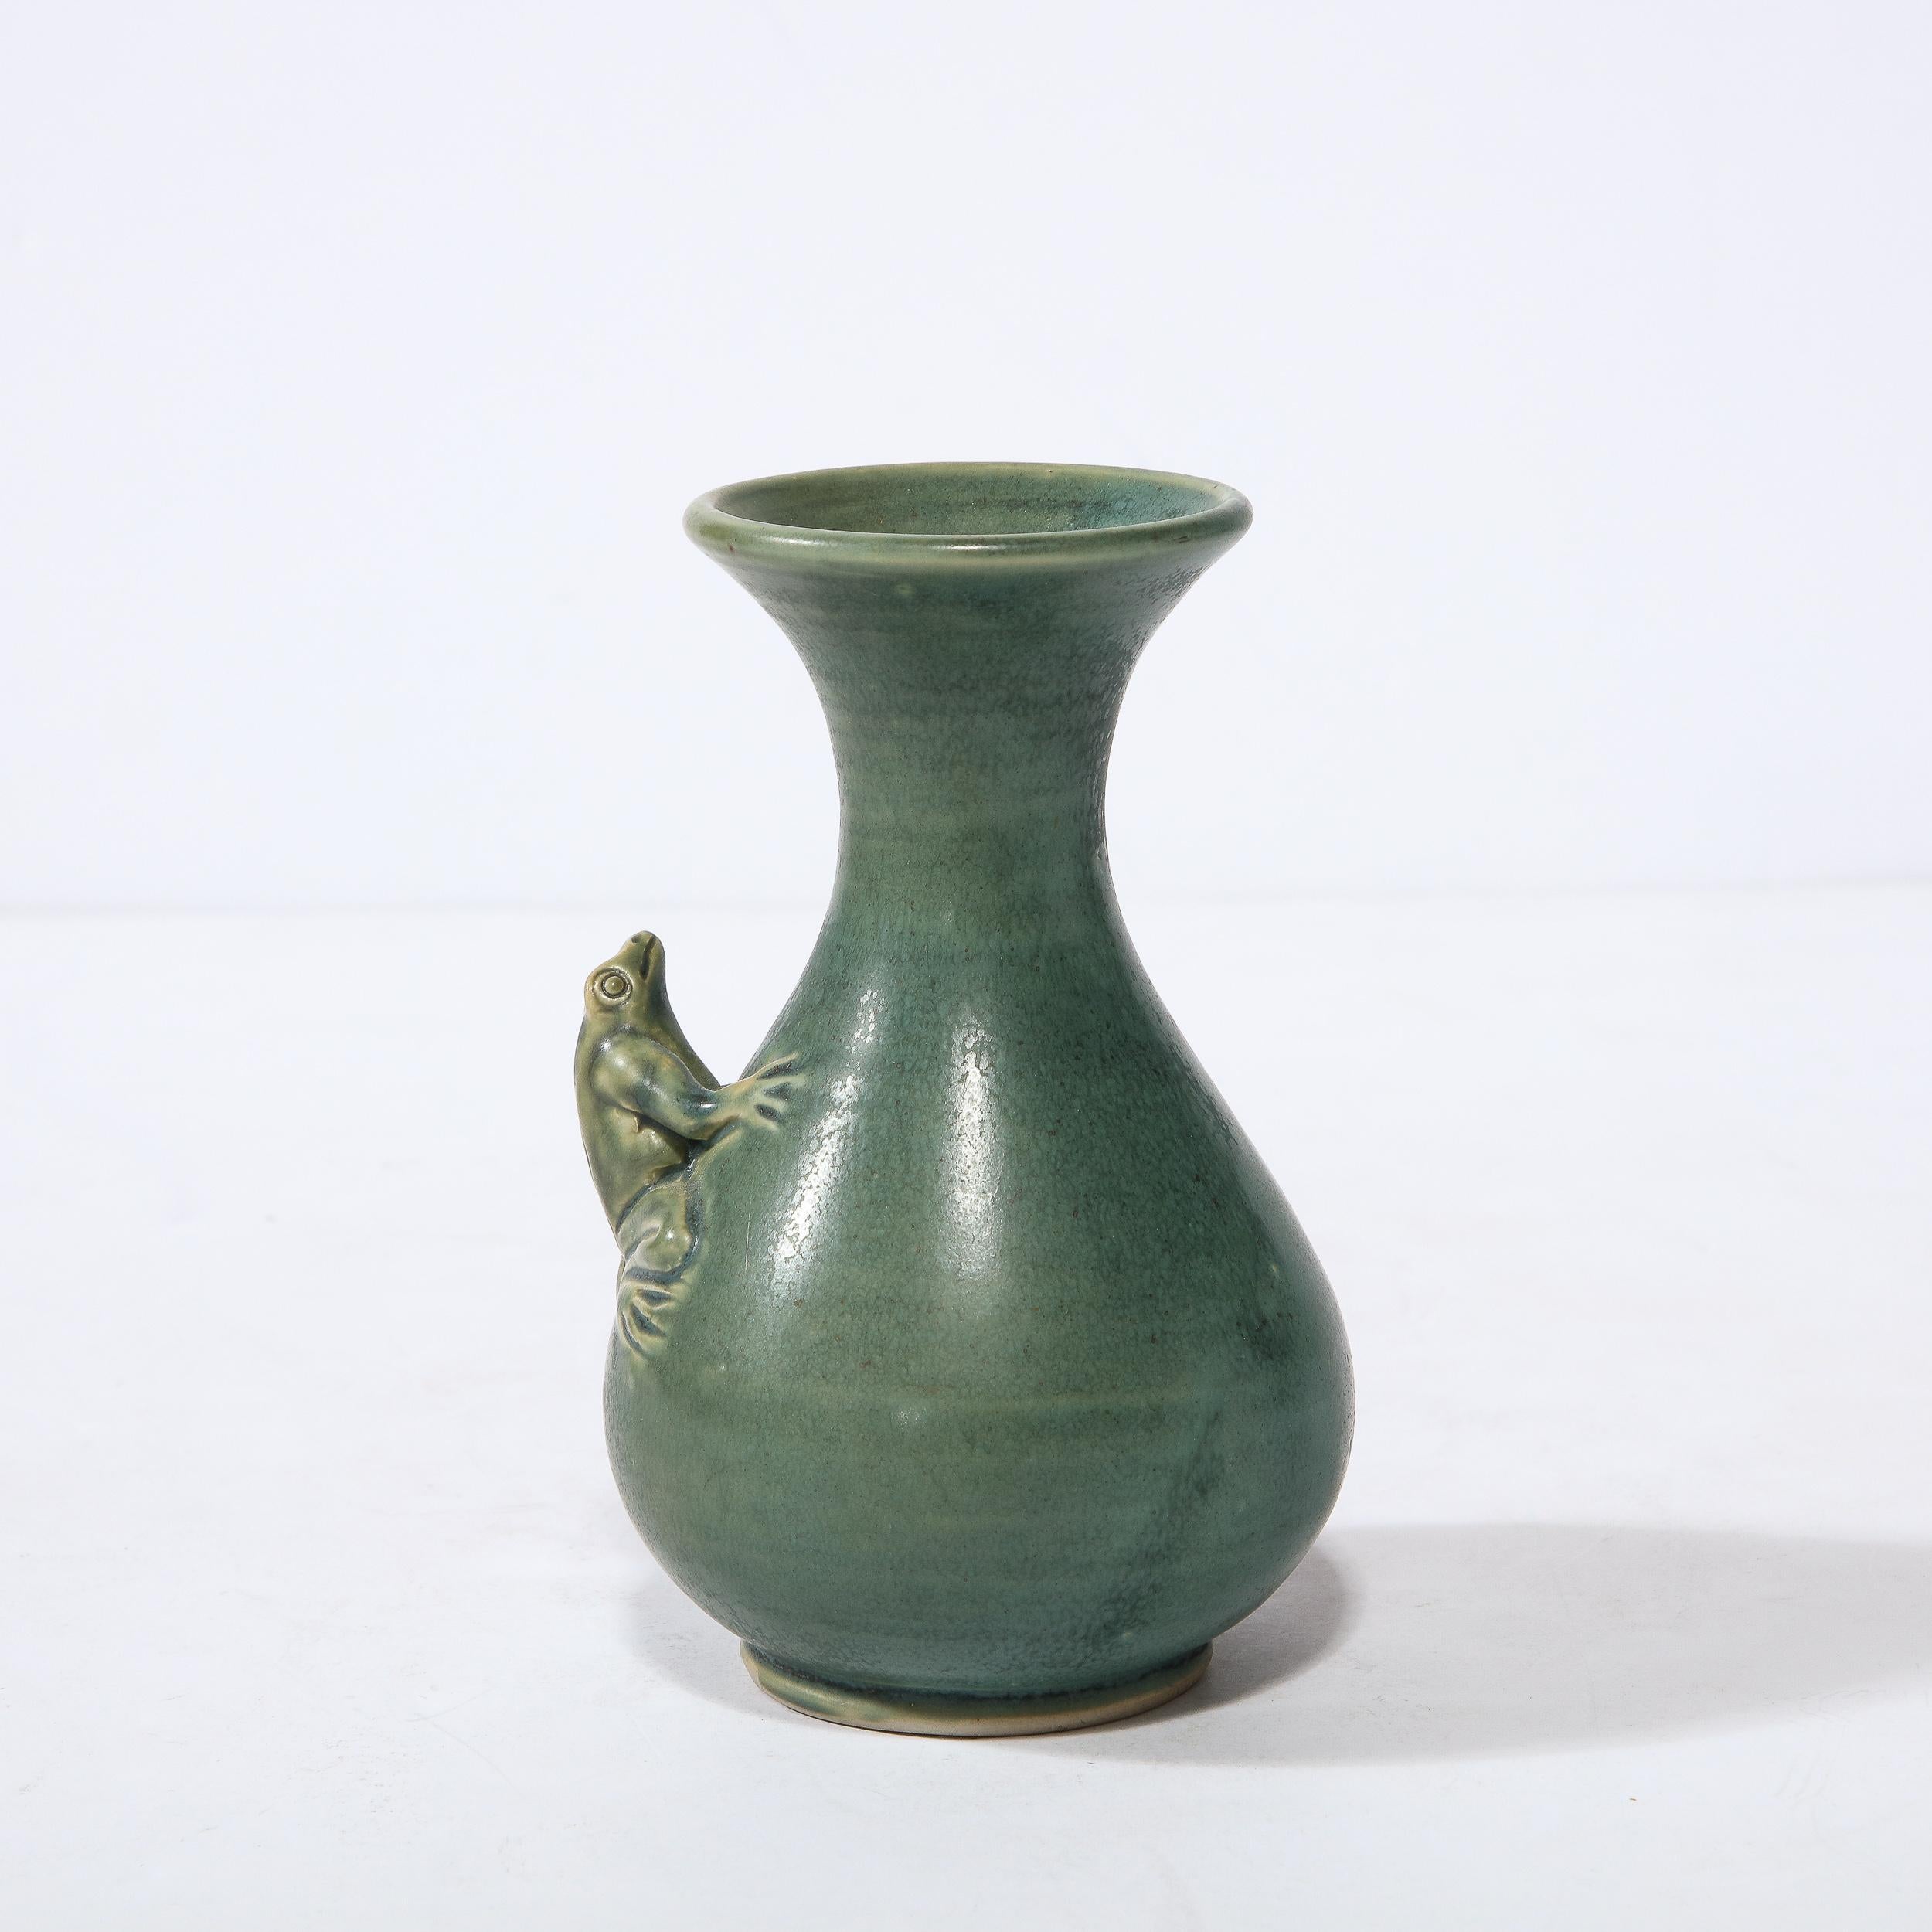 Modernist Sculptural Muted Jade Glazed Ceramic Vase with Frog Motif in Relief In Excellent Condition For Sale In New York, NY